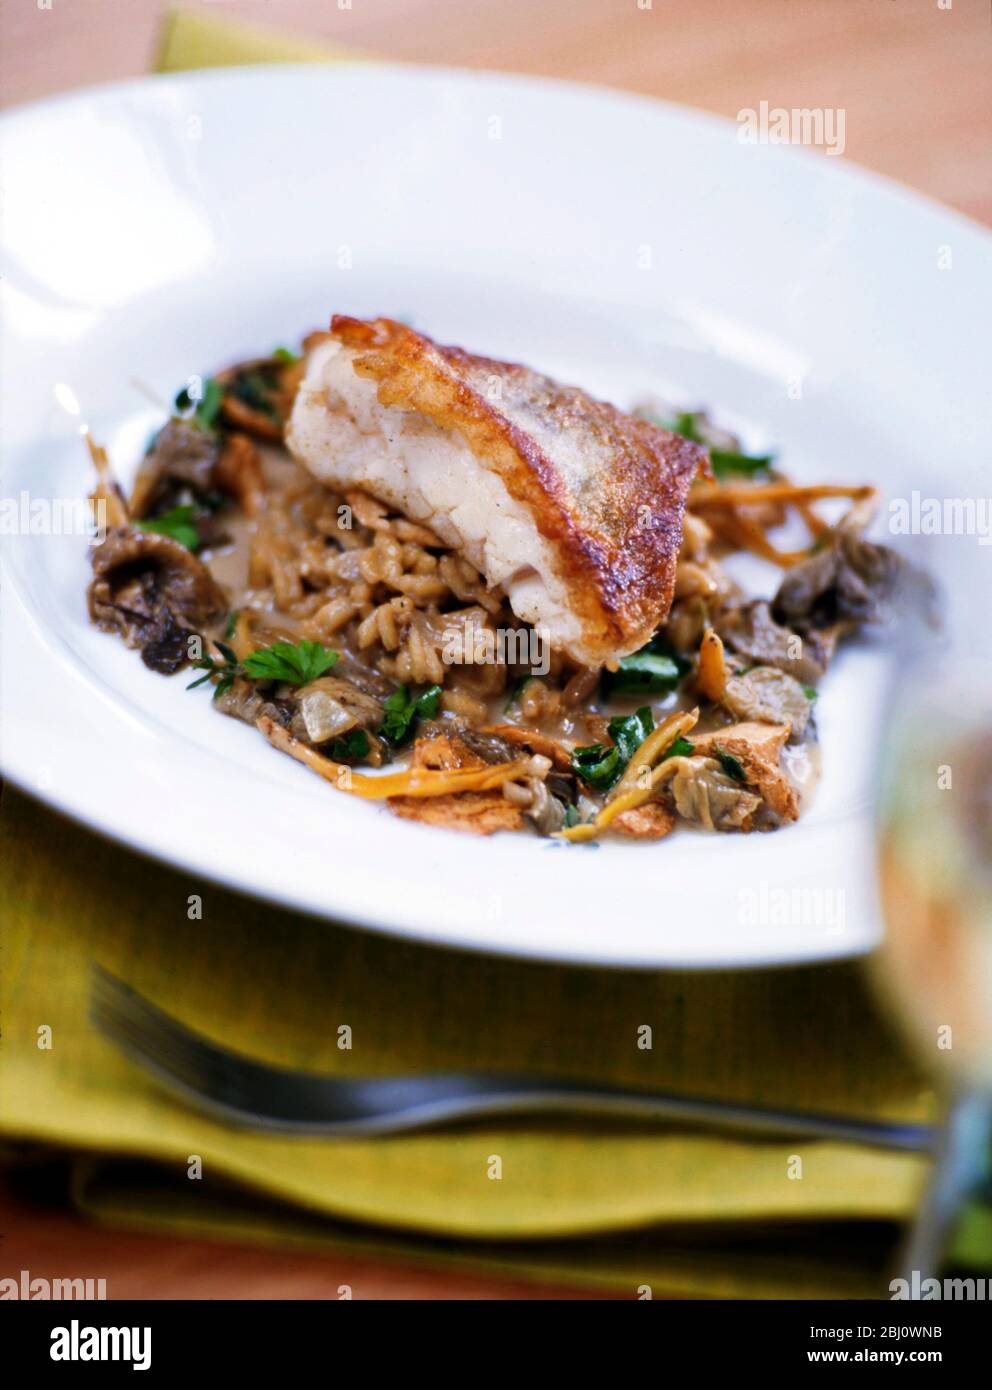 Pan fried fish on bed of wild mushroom risotto - Stock Photo